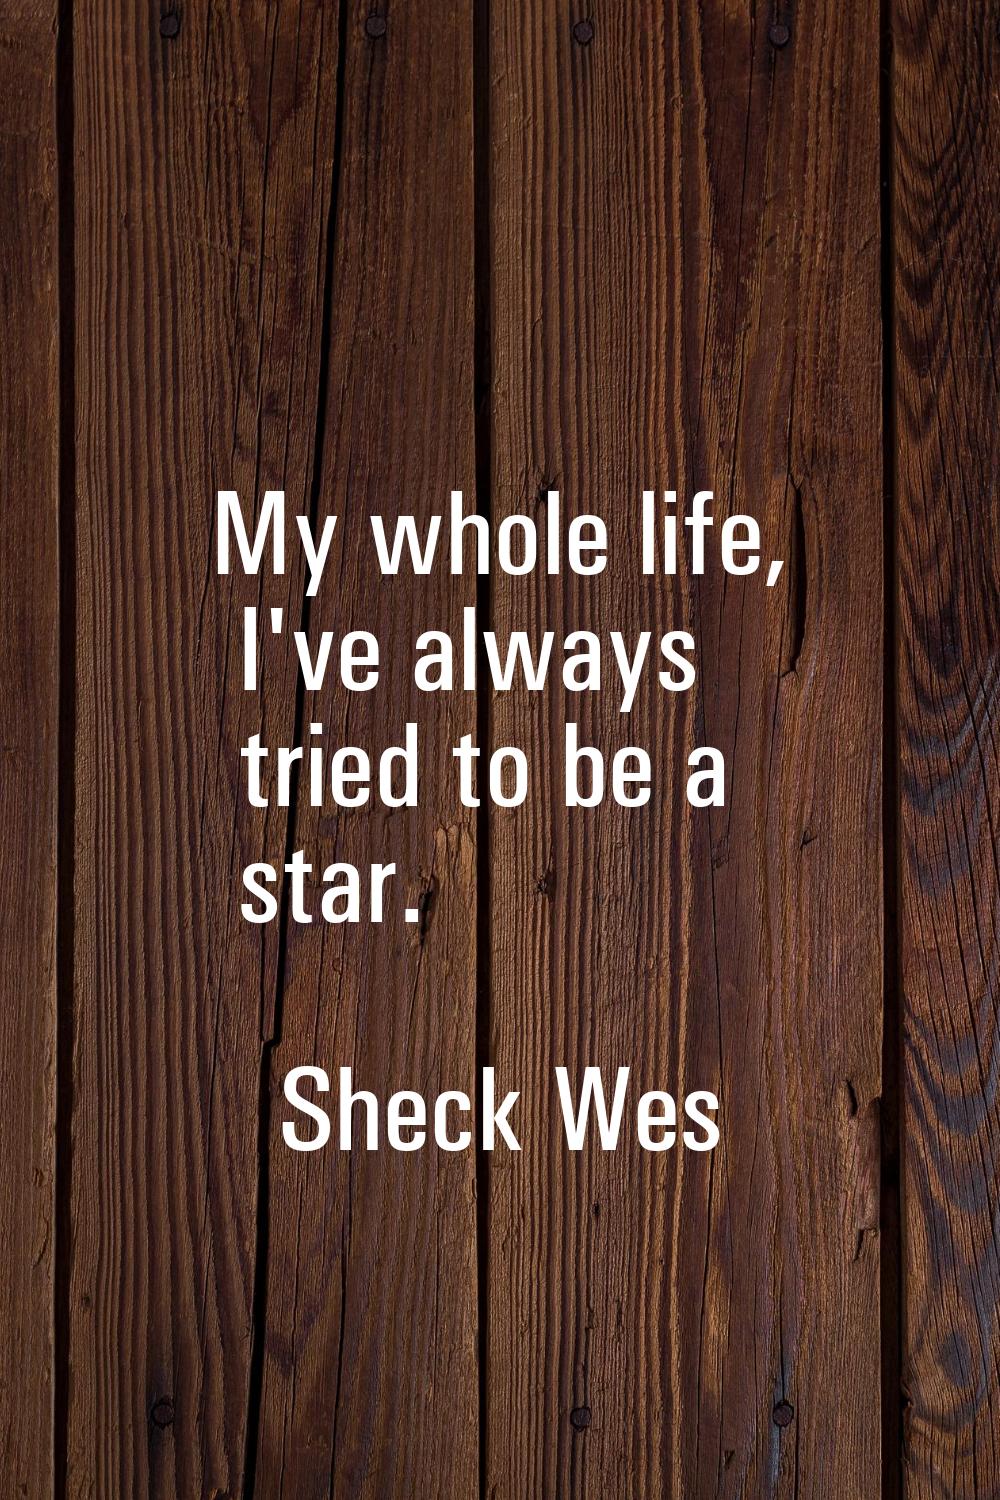 My whole life, I've always tried to be a star.